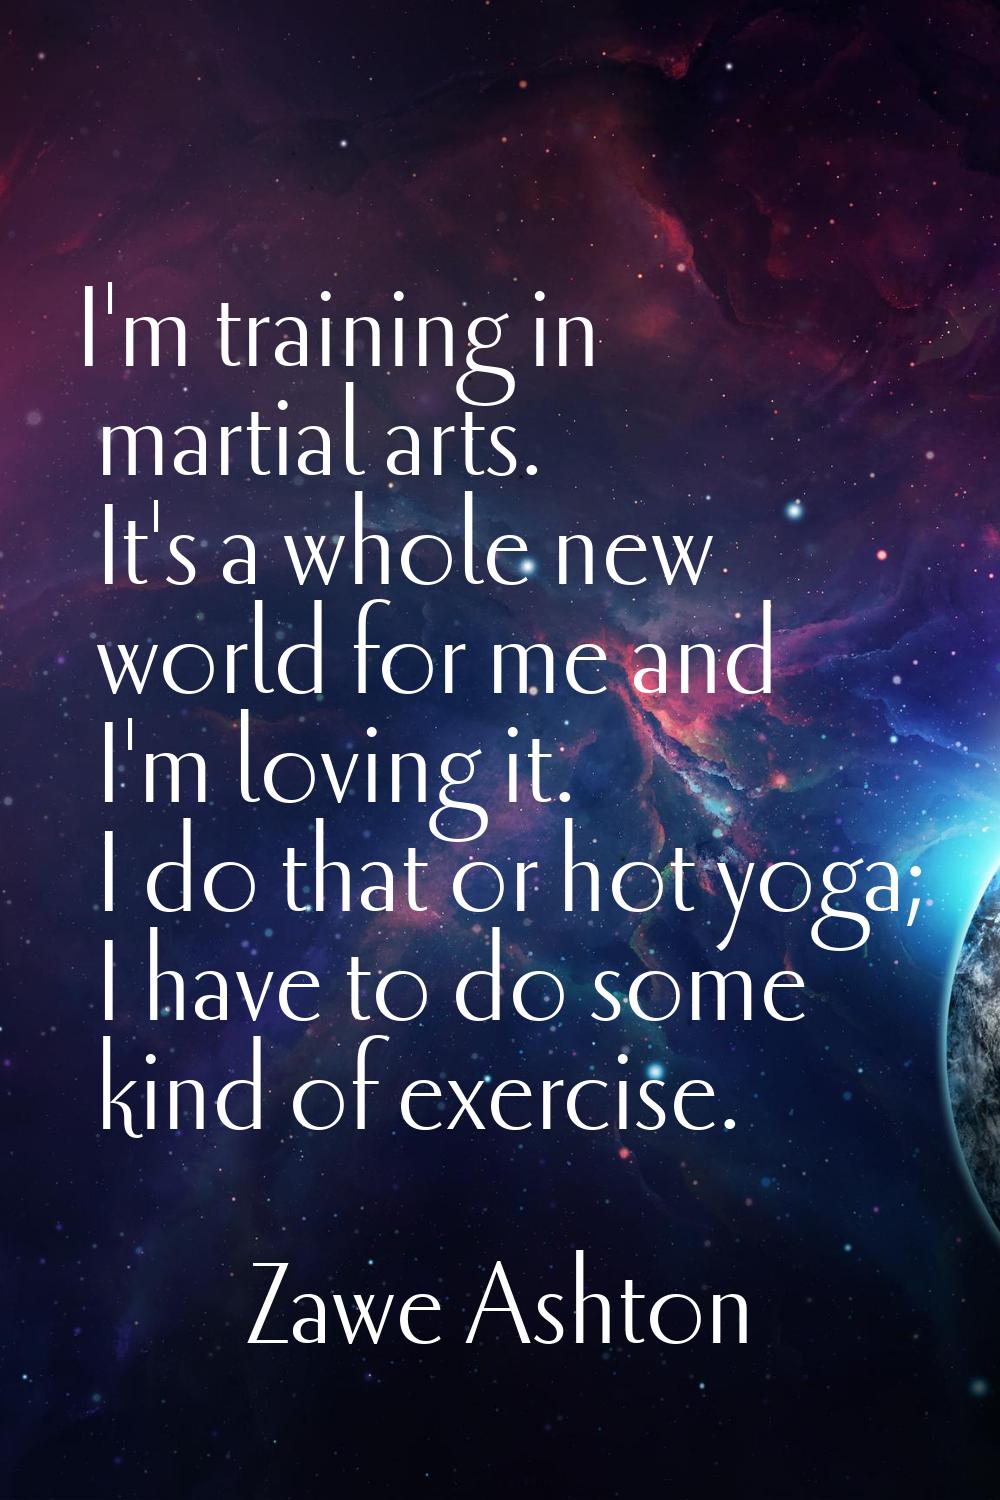 I'm training in martial arts. It's a whole new world for me and I'm loving it. I do that or hot yog